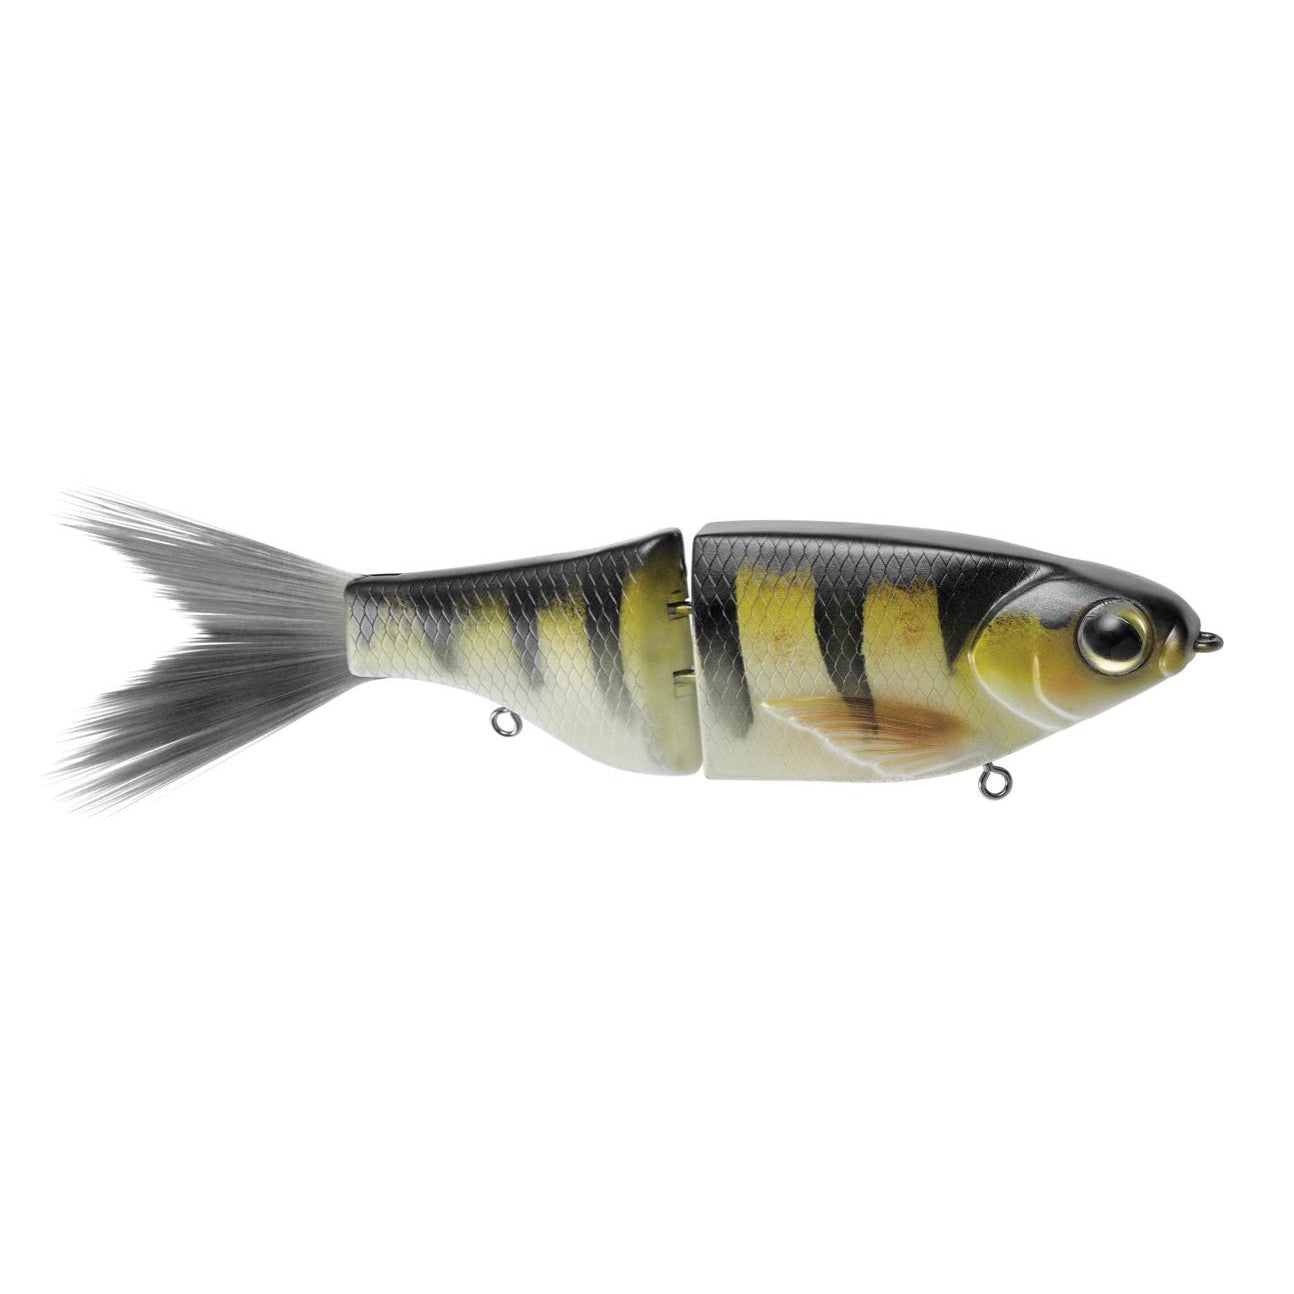 spro kgb chad shad swimbait - Buy spro kgb chad shad swimbait with free  shipping on AliExpress